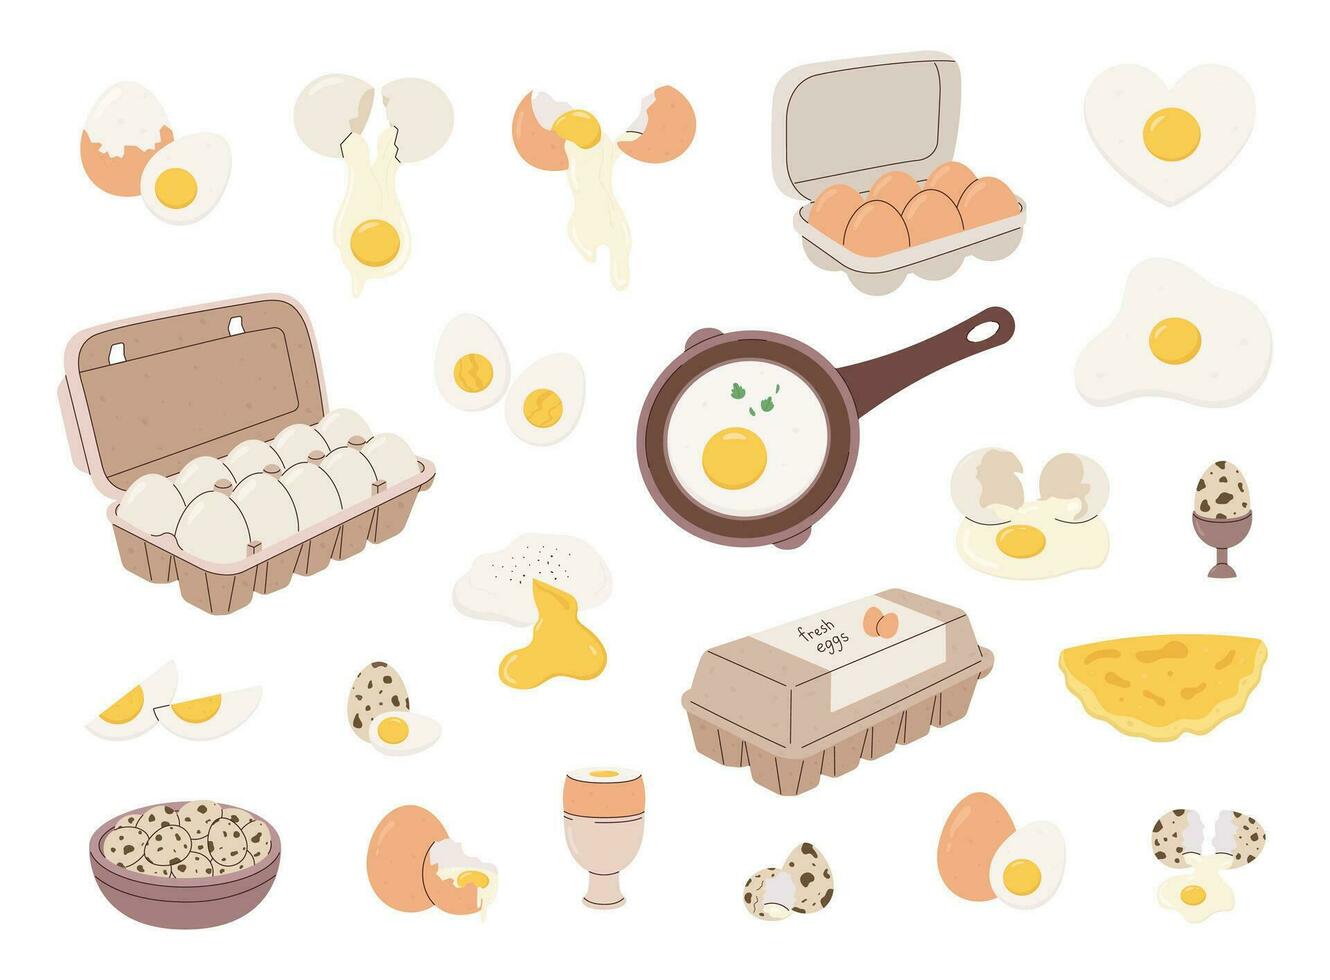 chicken and quail eggs set, whole, raw, fried, cracked, broken, in shell, omelette, packed in cardboard box, flat style vector illustration